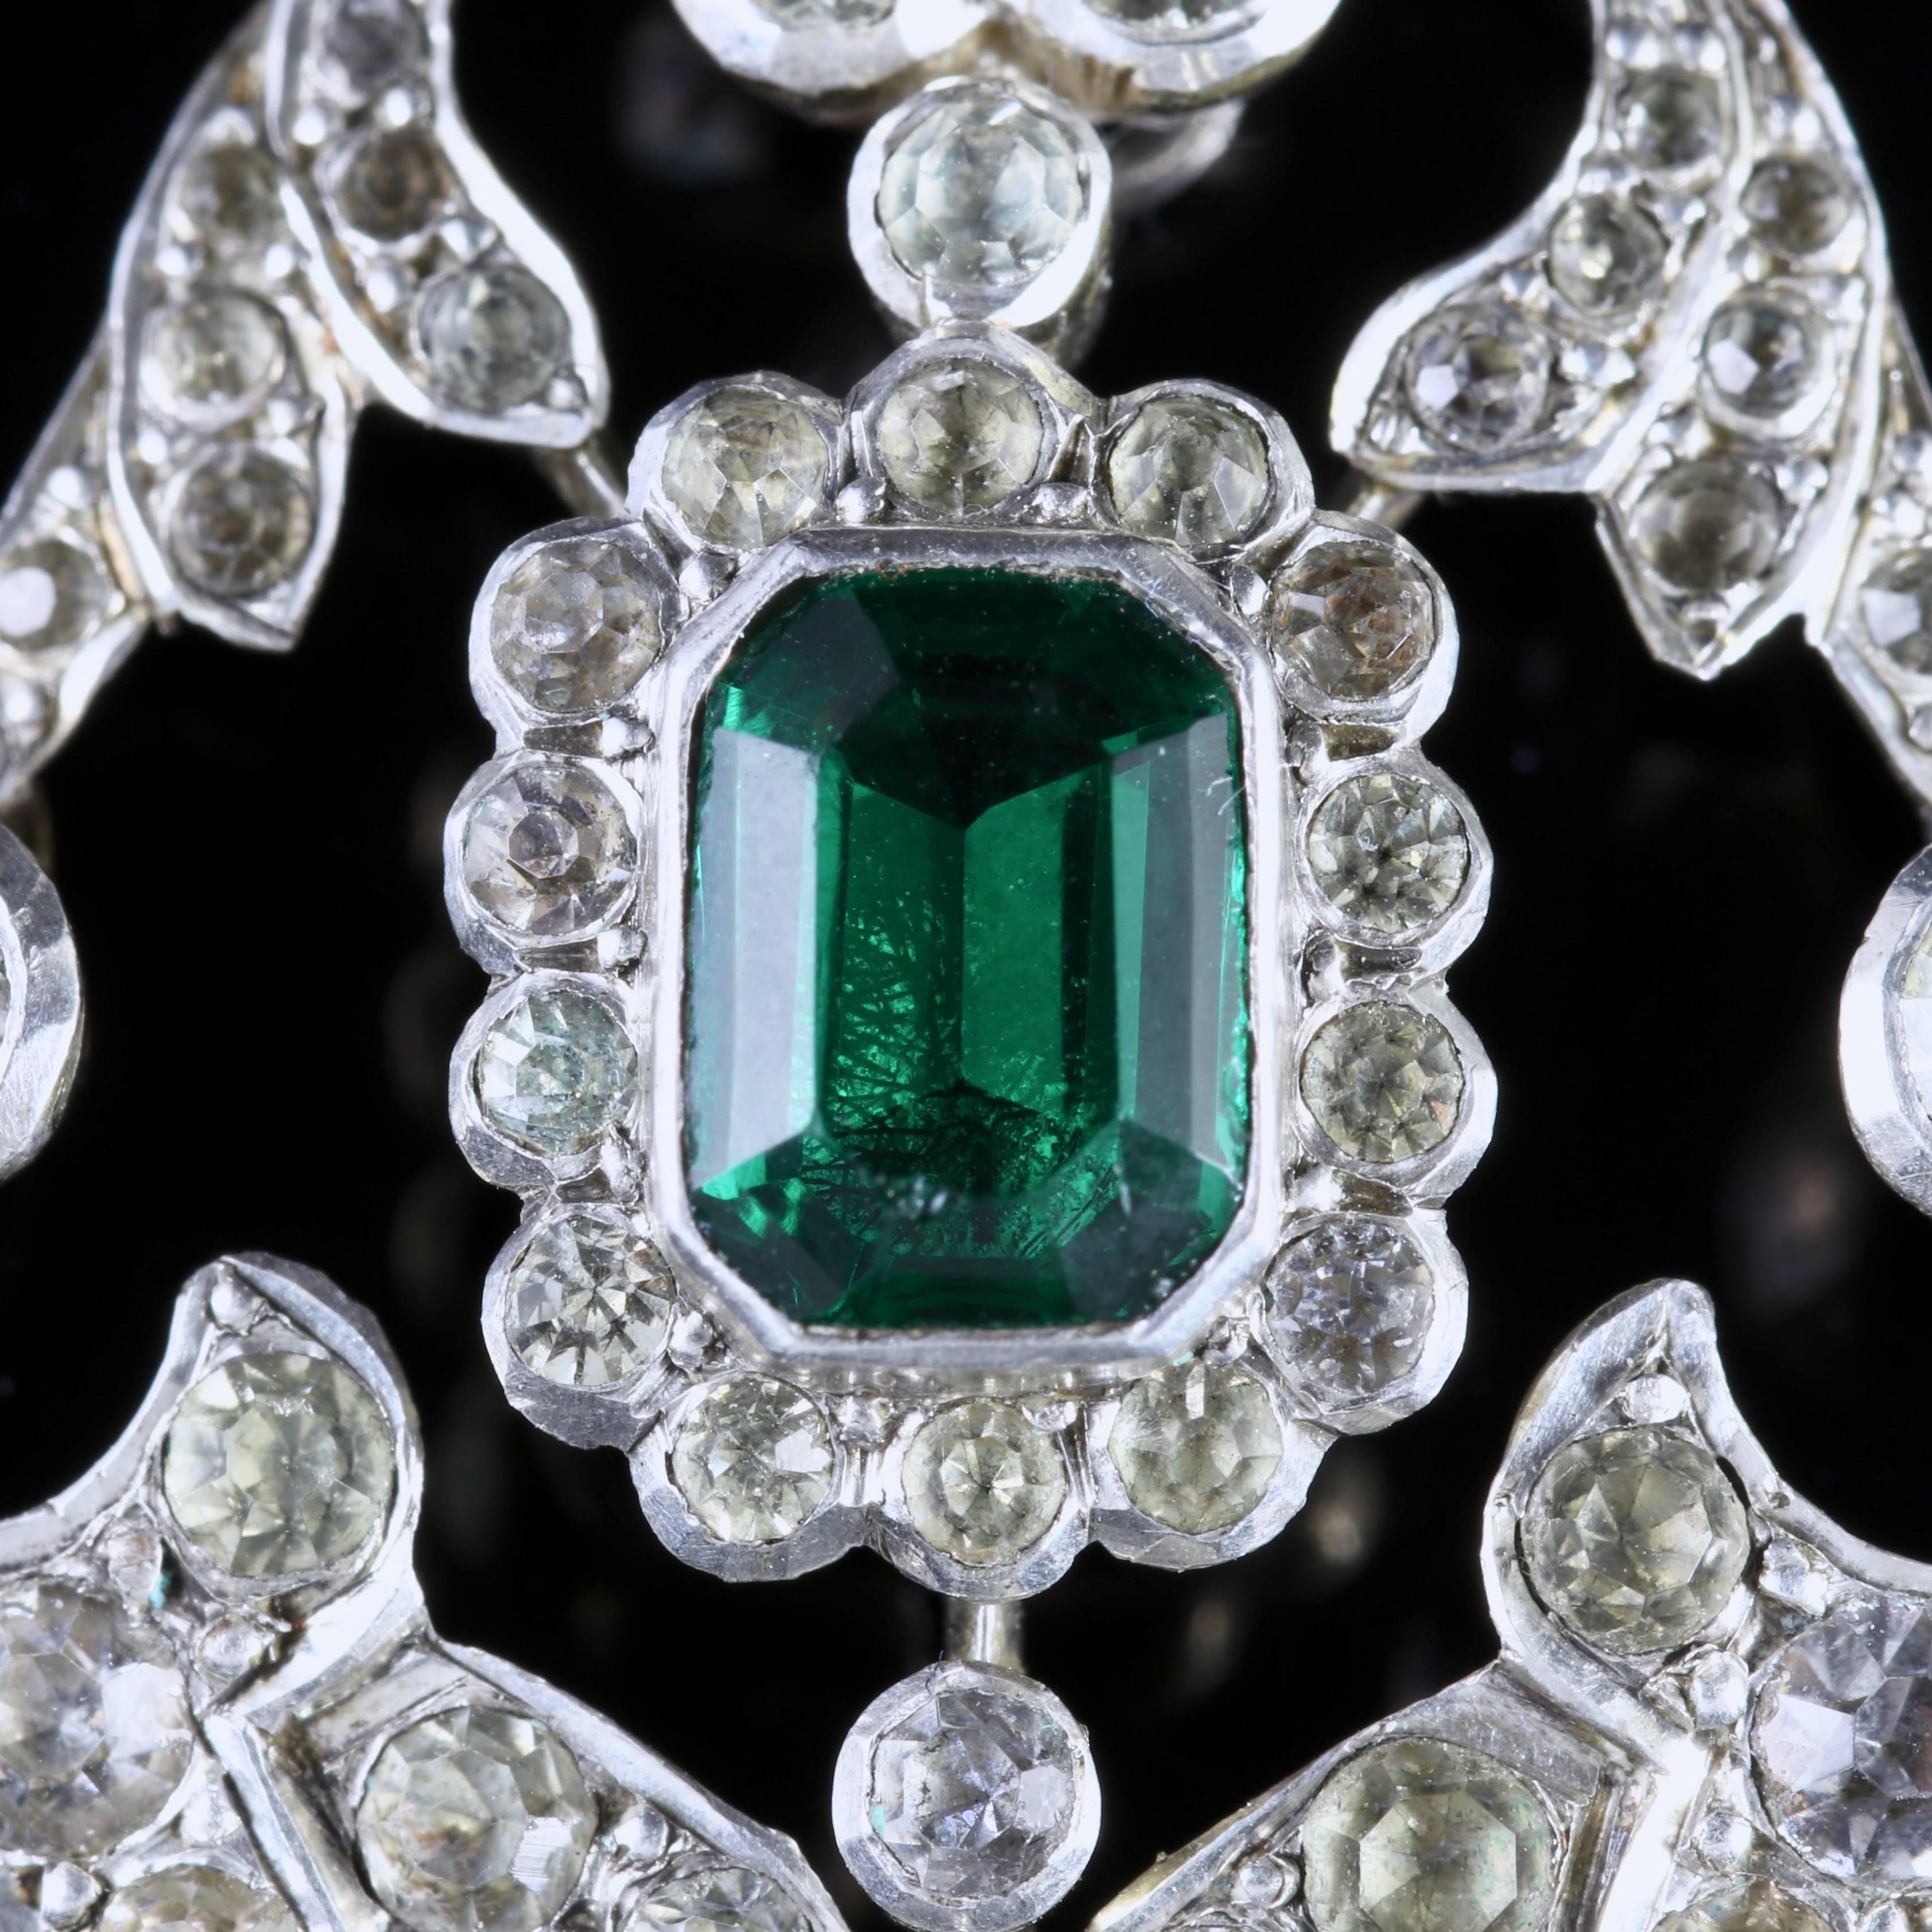 To read more please click continue reading below-

This stunning antique Sterling Silver Paste pendant is genuine Victorian, Circa 1900. 

The pendant is set with a beautiful Emerald green Paste Stone in the centre and surrounded by sparkling white